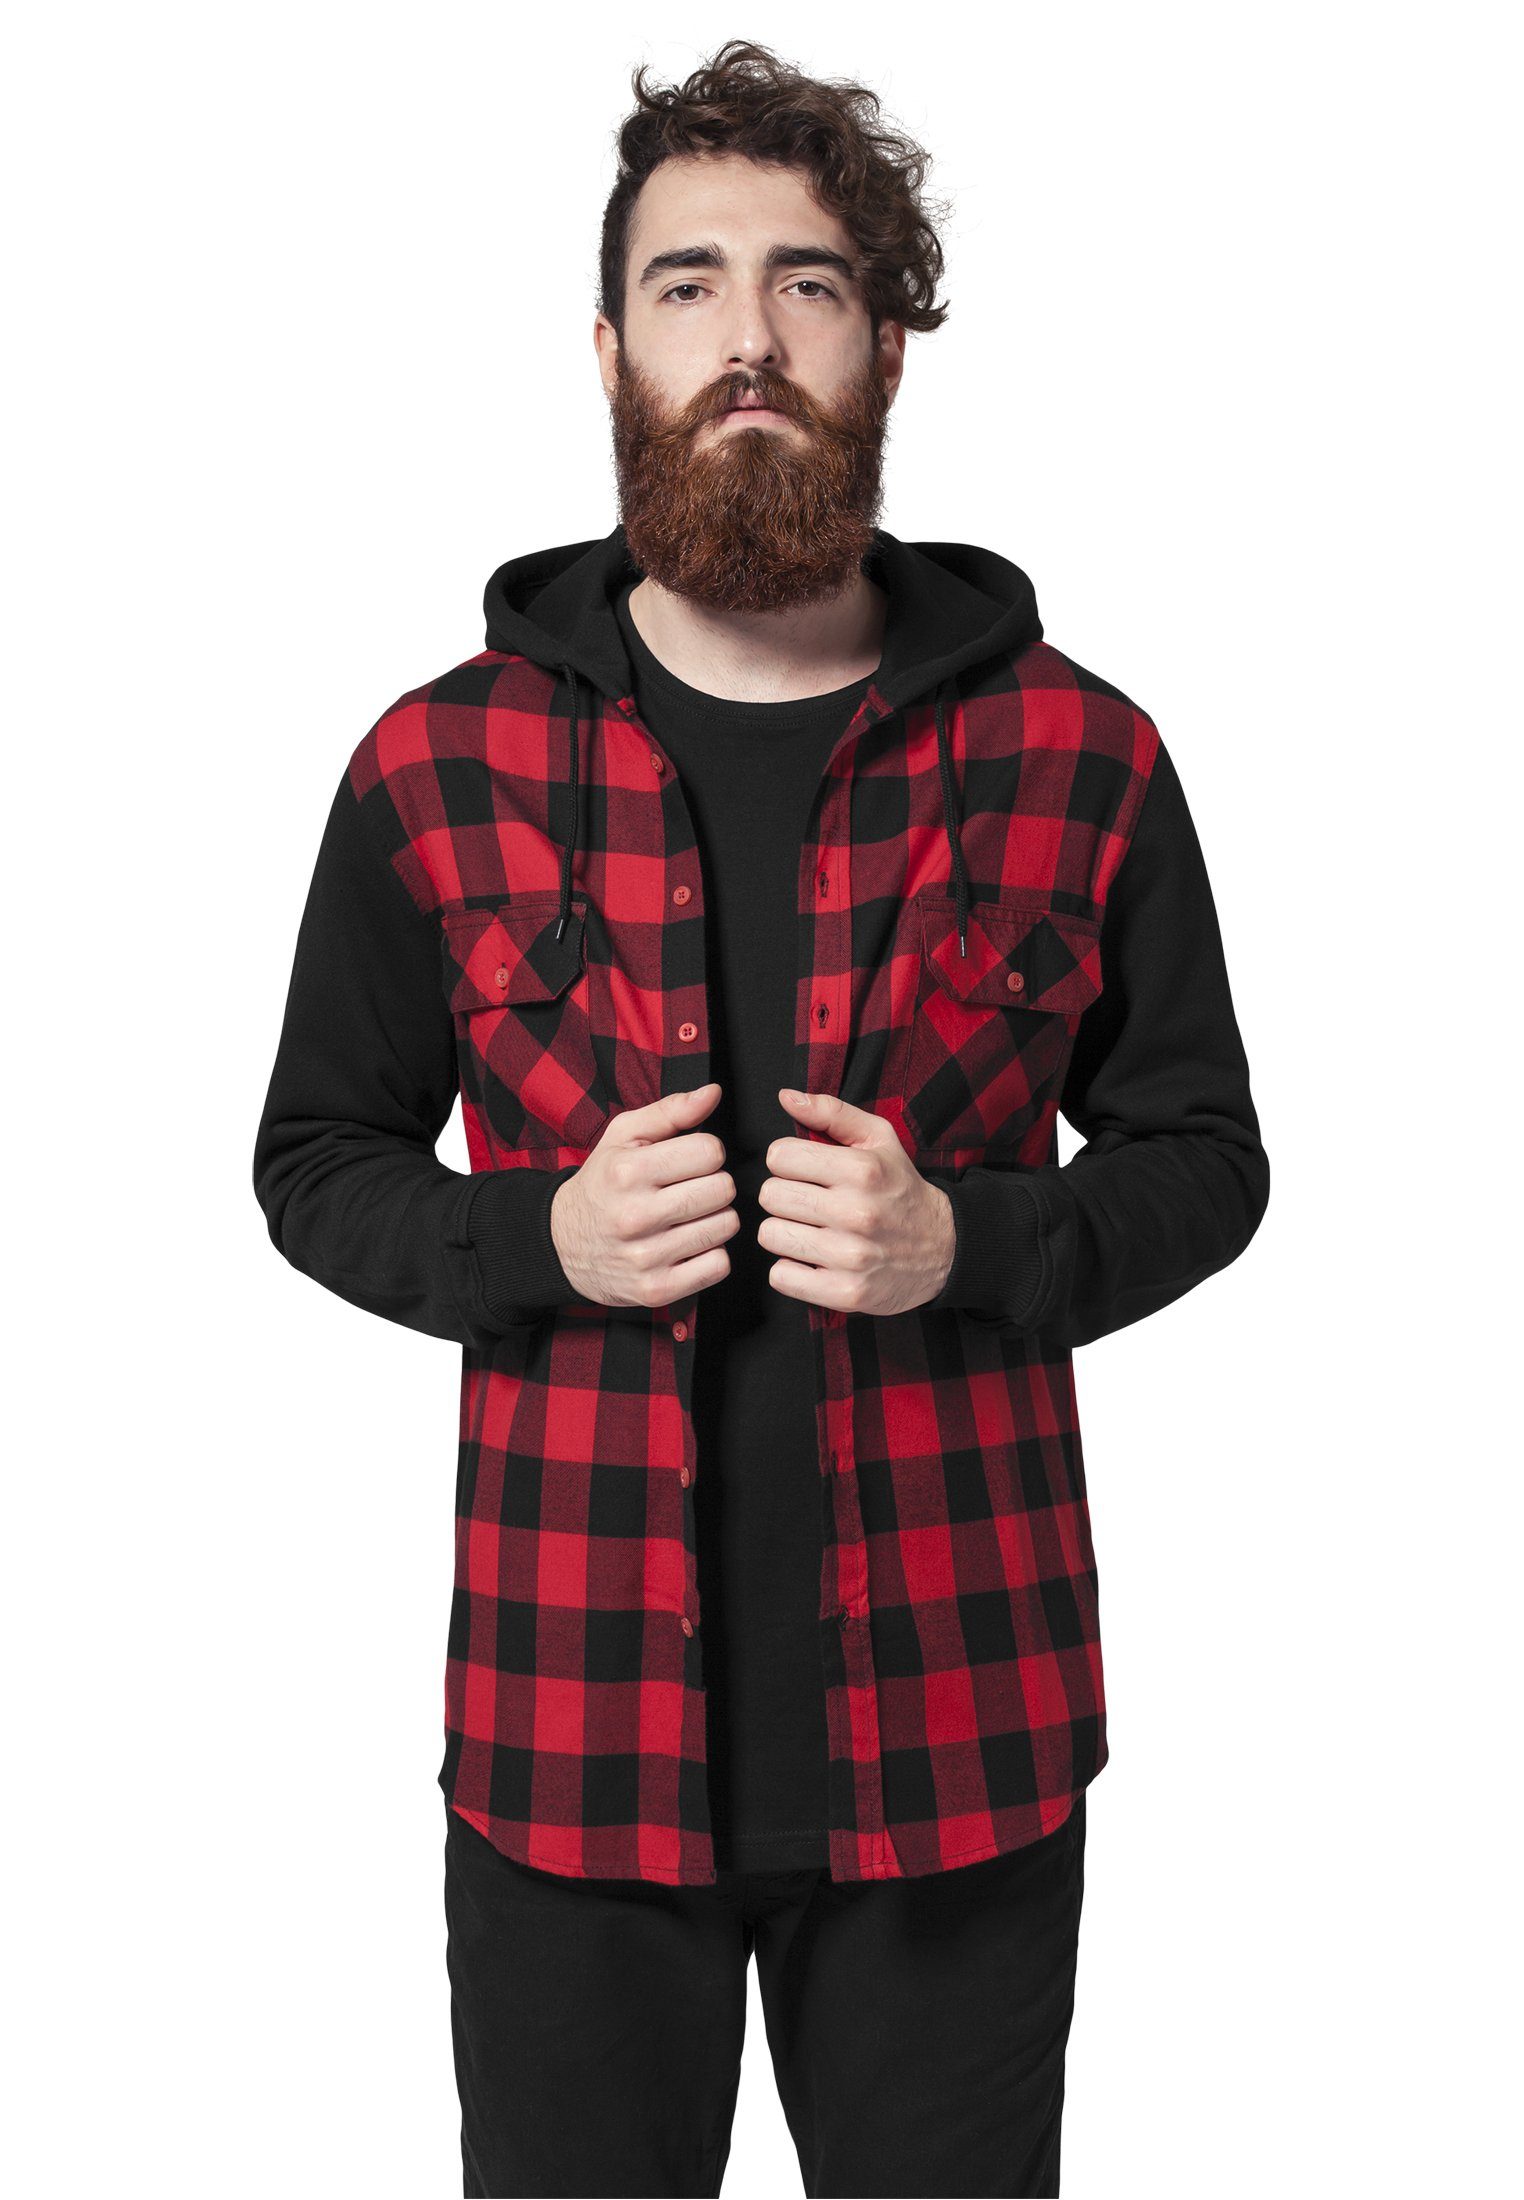 URBAN CLASSICS Shirtjacke Herren Hooded Checked Flanell Sweat Sleeve Shirt (1-tlg) blk/red/bl